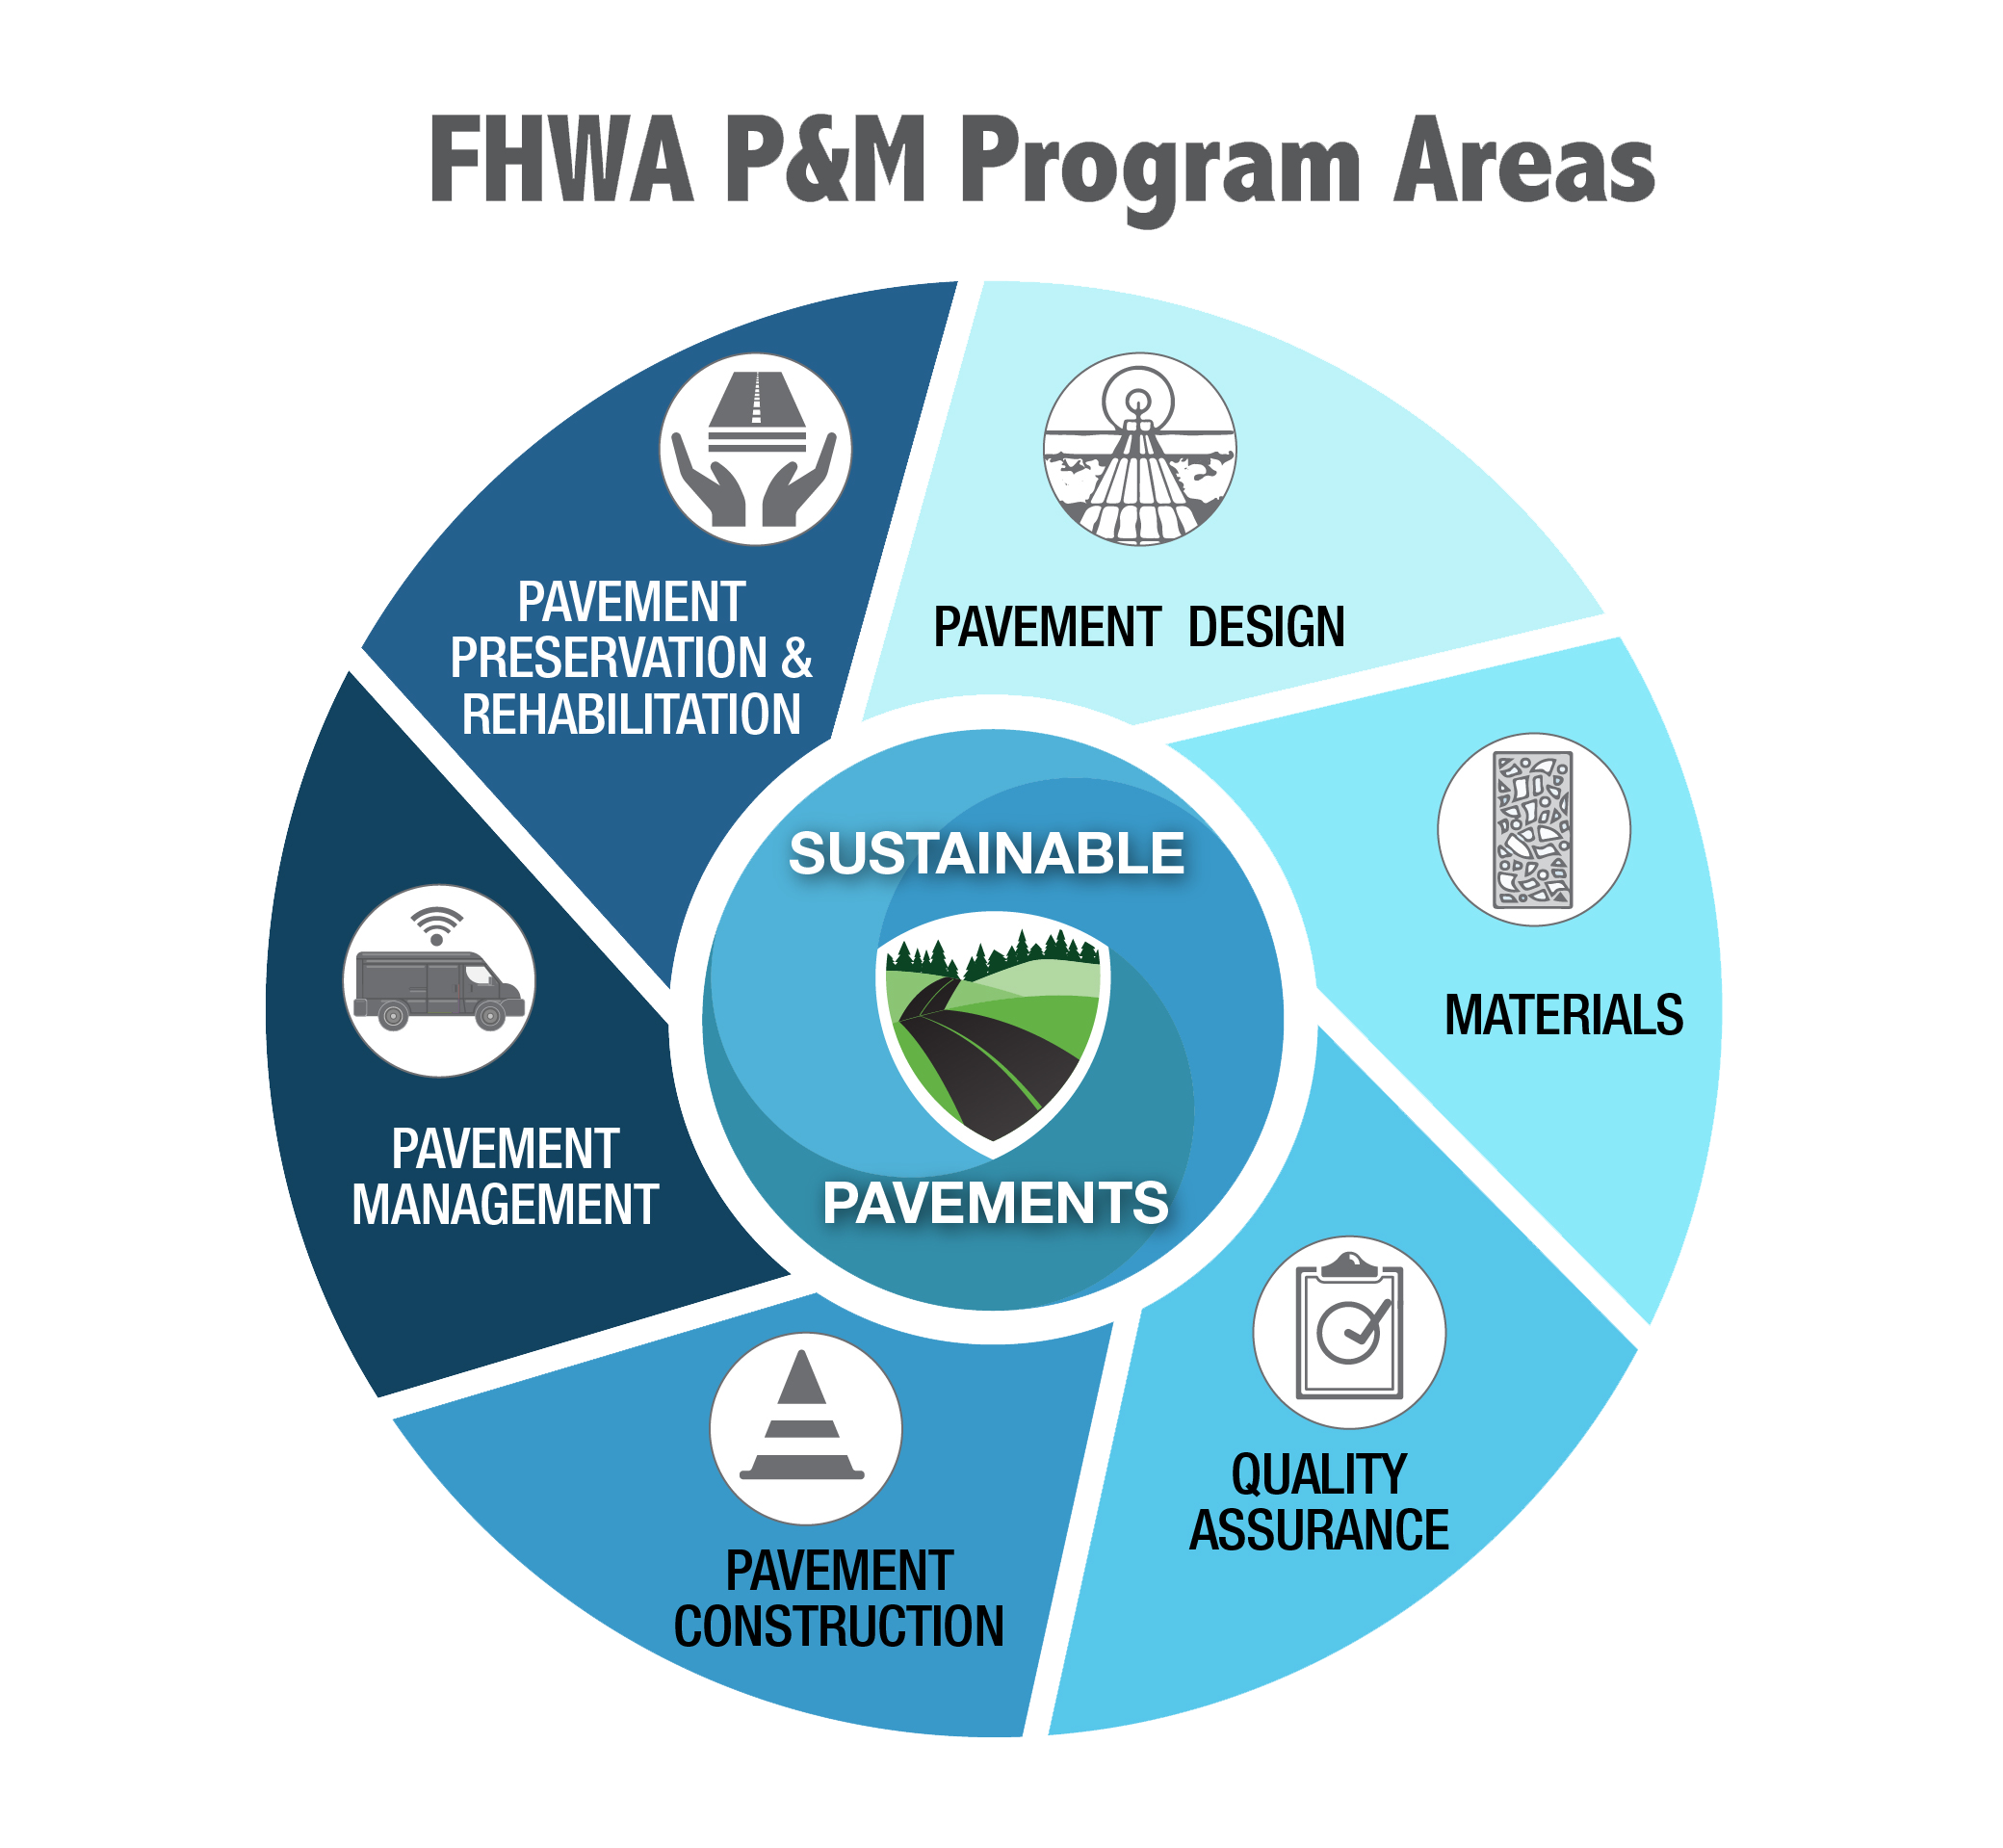 The circular image describes the FHWA pavement and materials 7 core program areas. Those areas are Pavement Design, Materials, Quality Assurance, Pavement Construction, Pavement Management, Pavement Preservation and Rehabilitation, and Sustainability